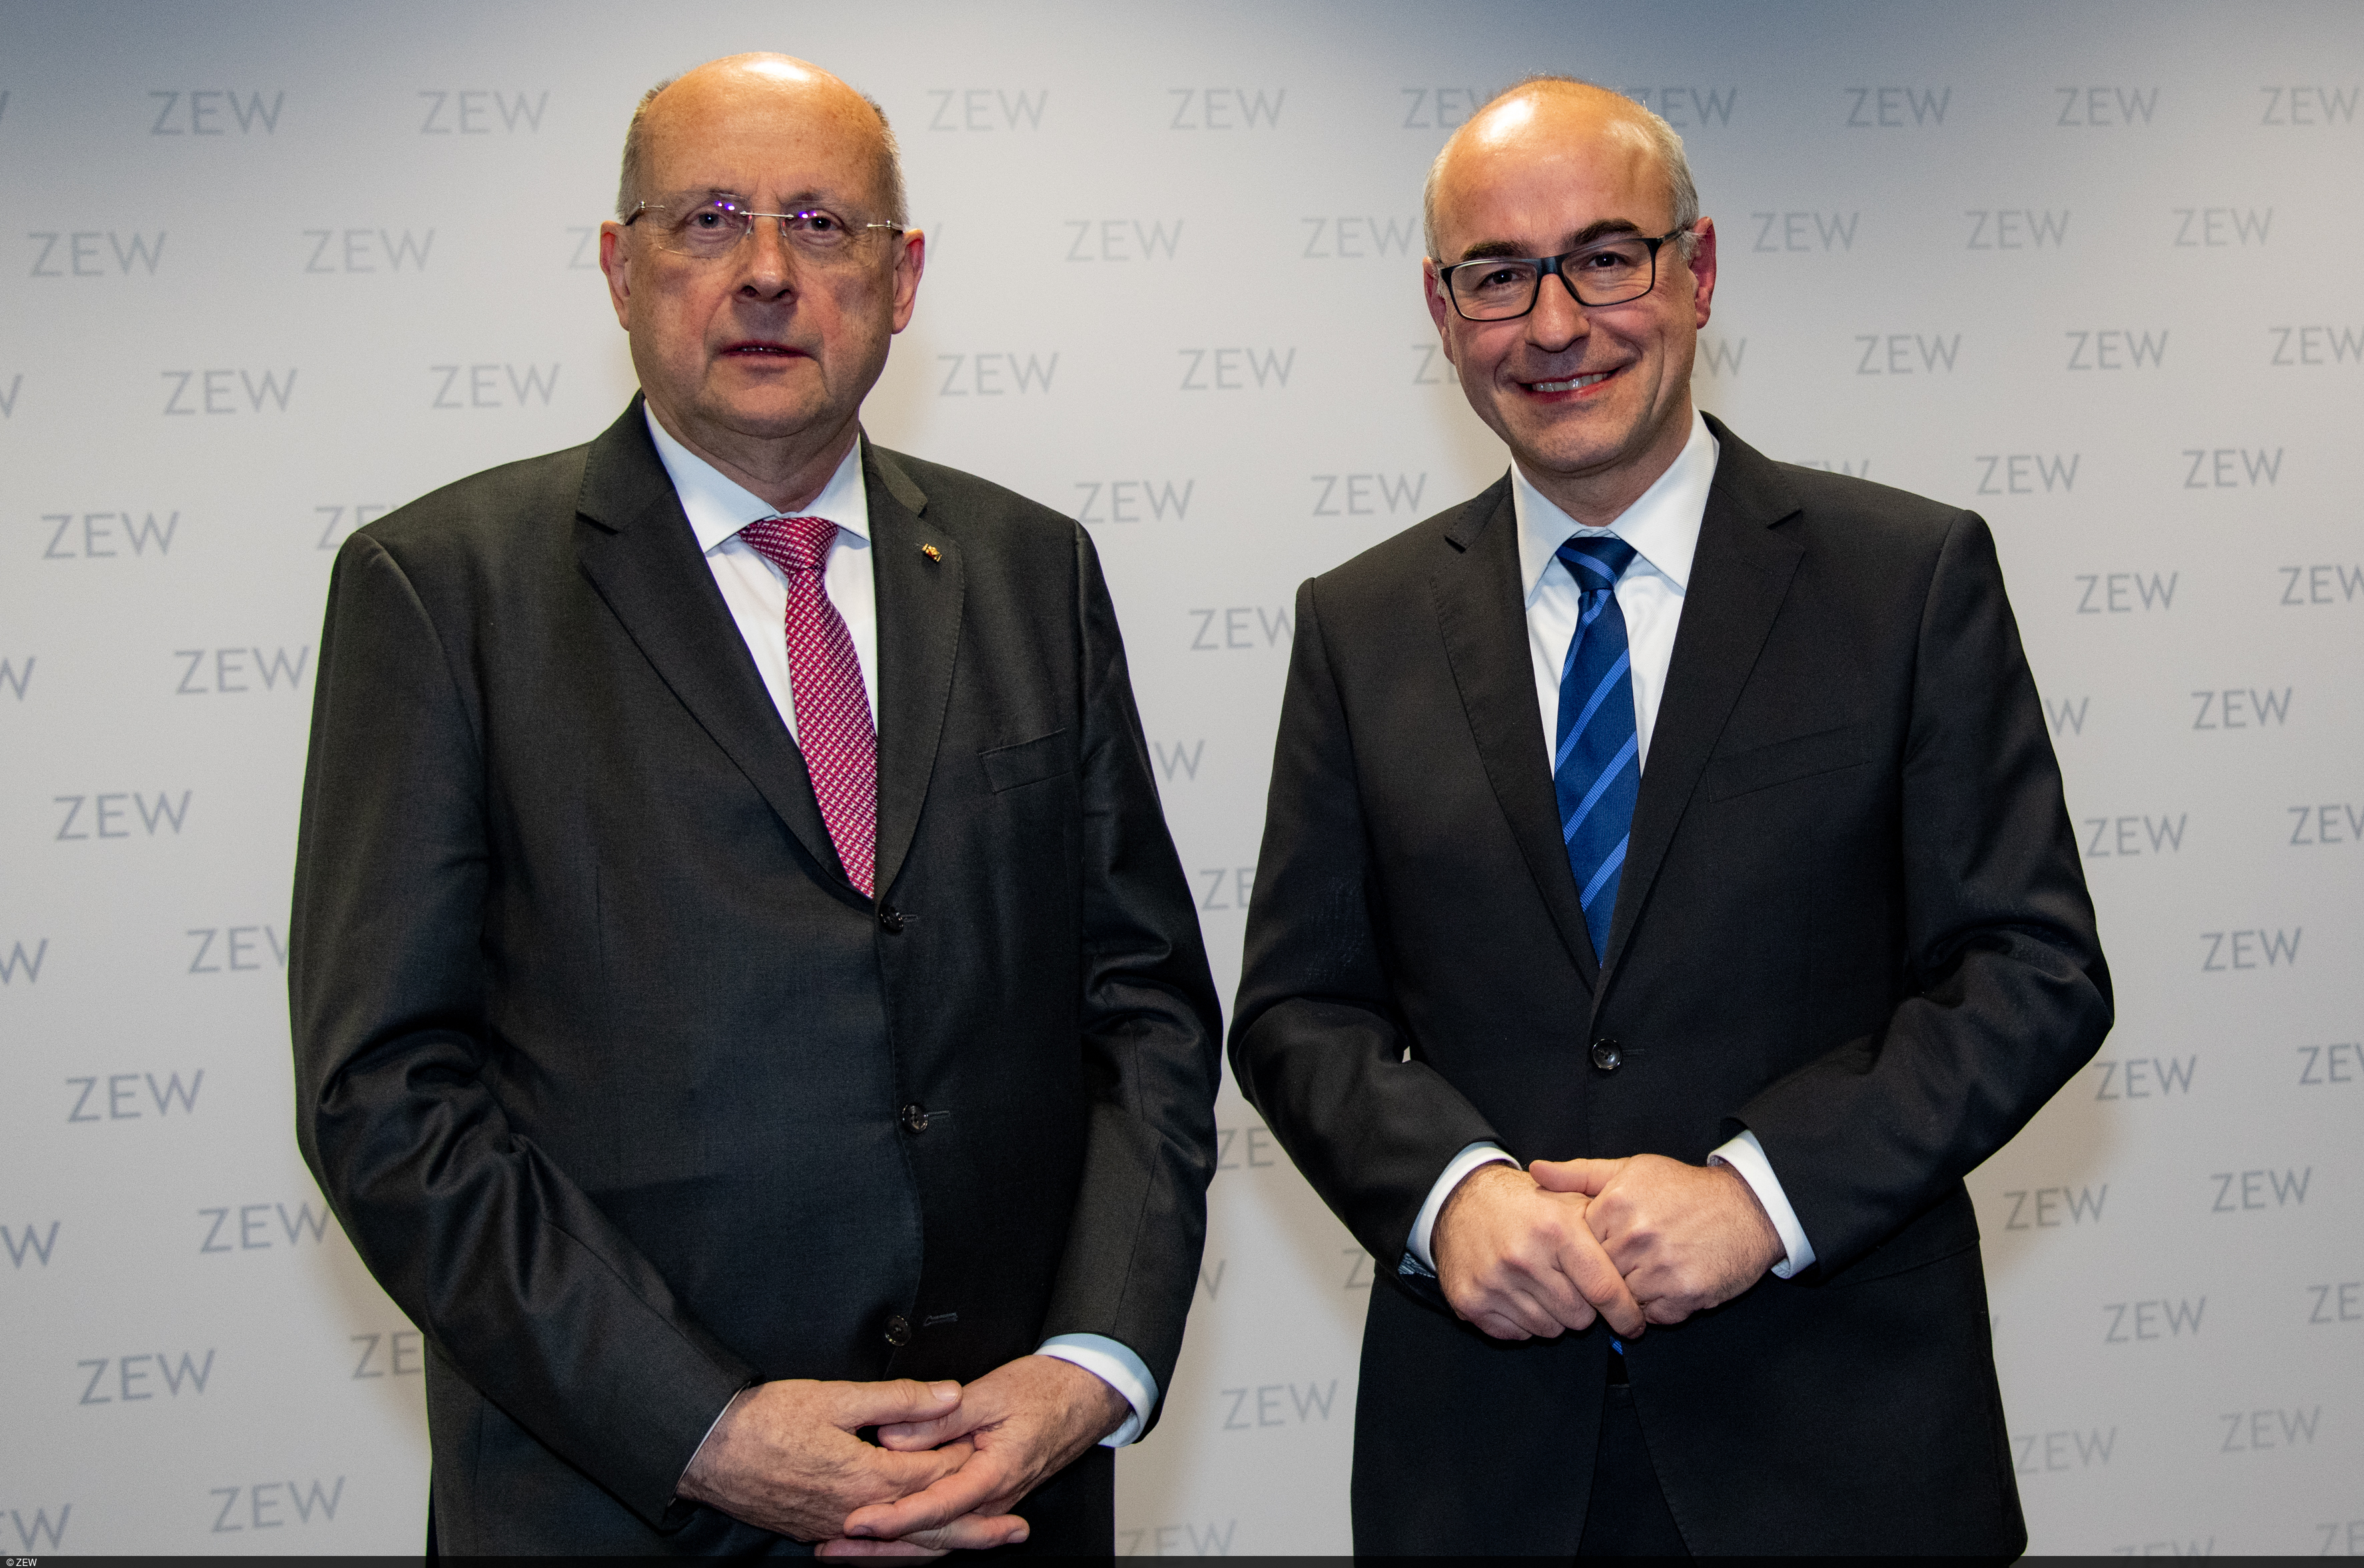 Former Constitutional Court Judge Ferdinand Kirchhof spoke at ZEW about tax law in the EU